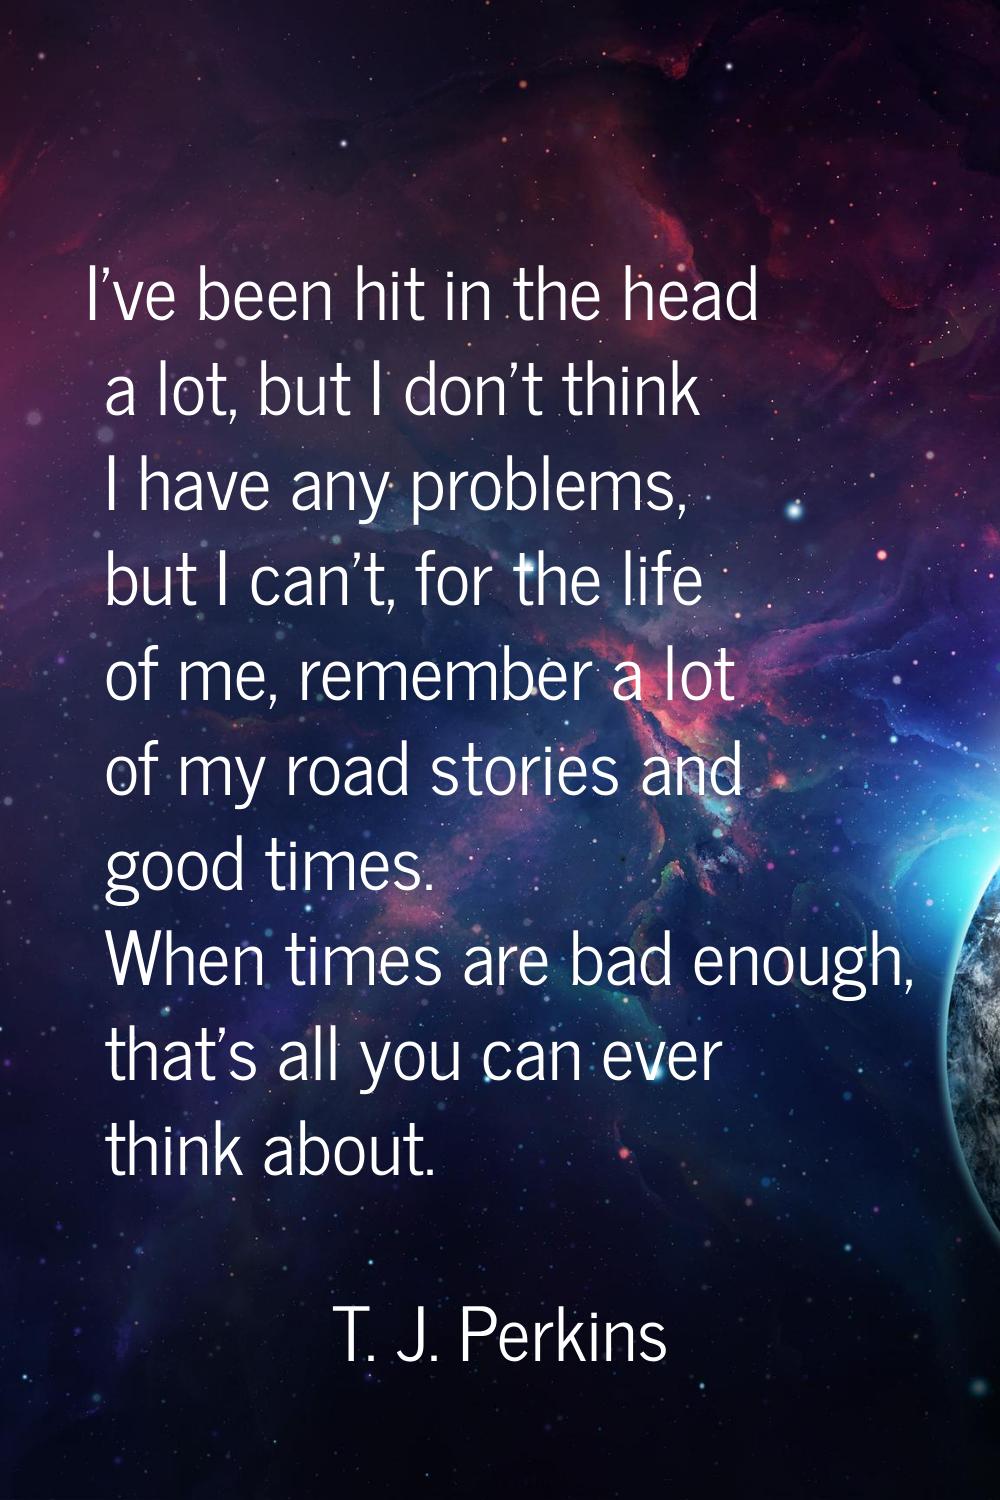 I've been hit in the head a lot, but I don't think I have any problems, but I can't, for the life o